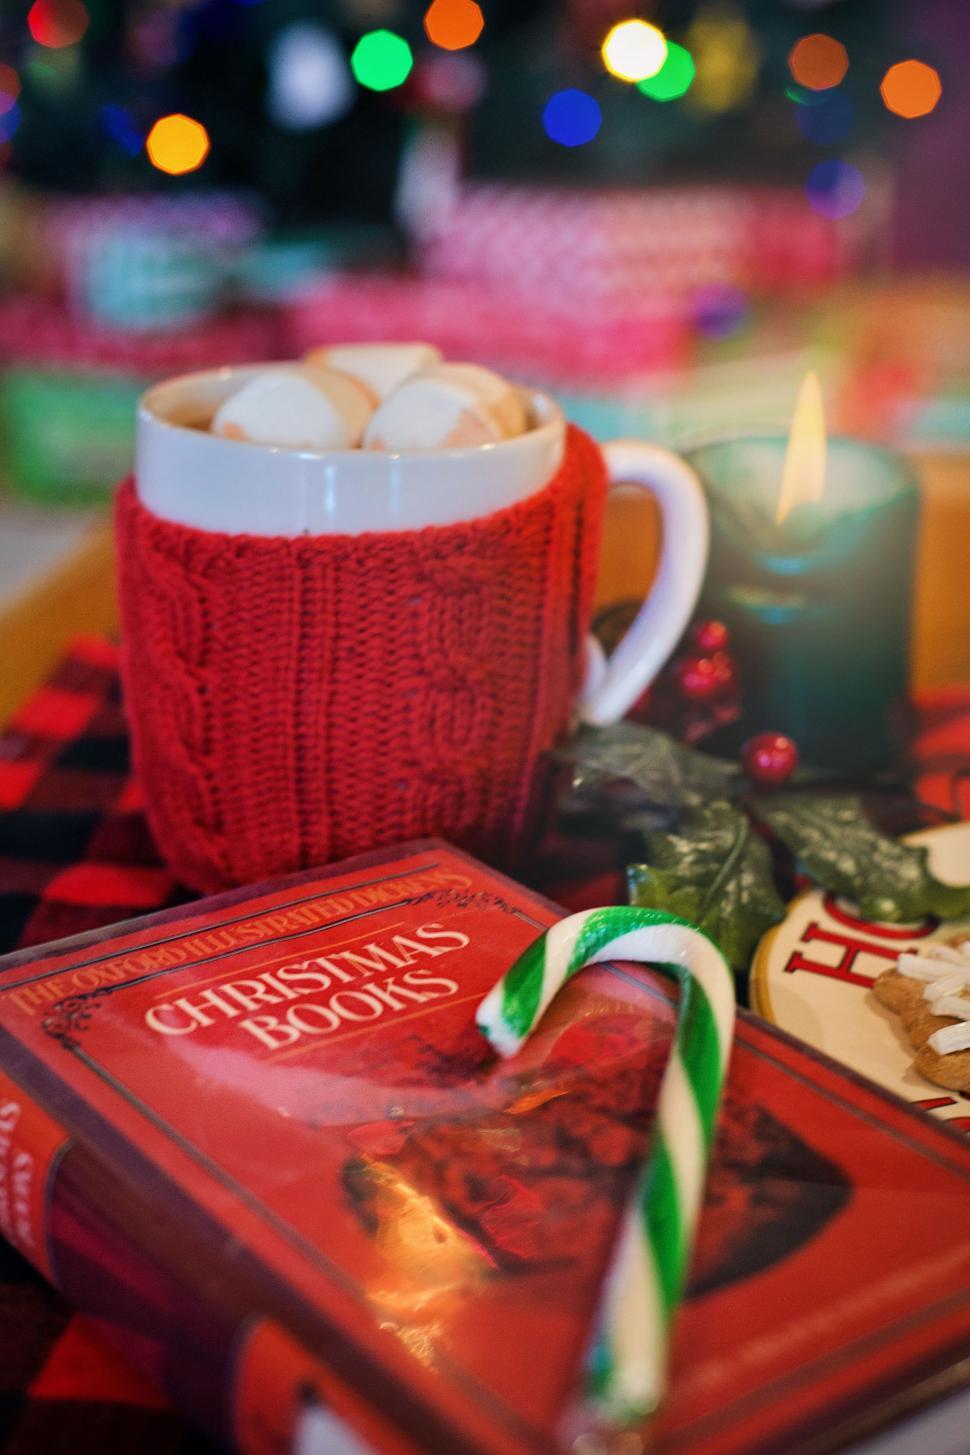 Free Image of Red Christmas Book and Green Striped Candy Cane 